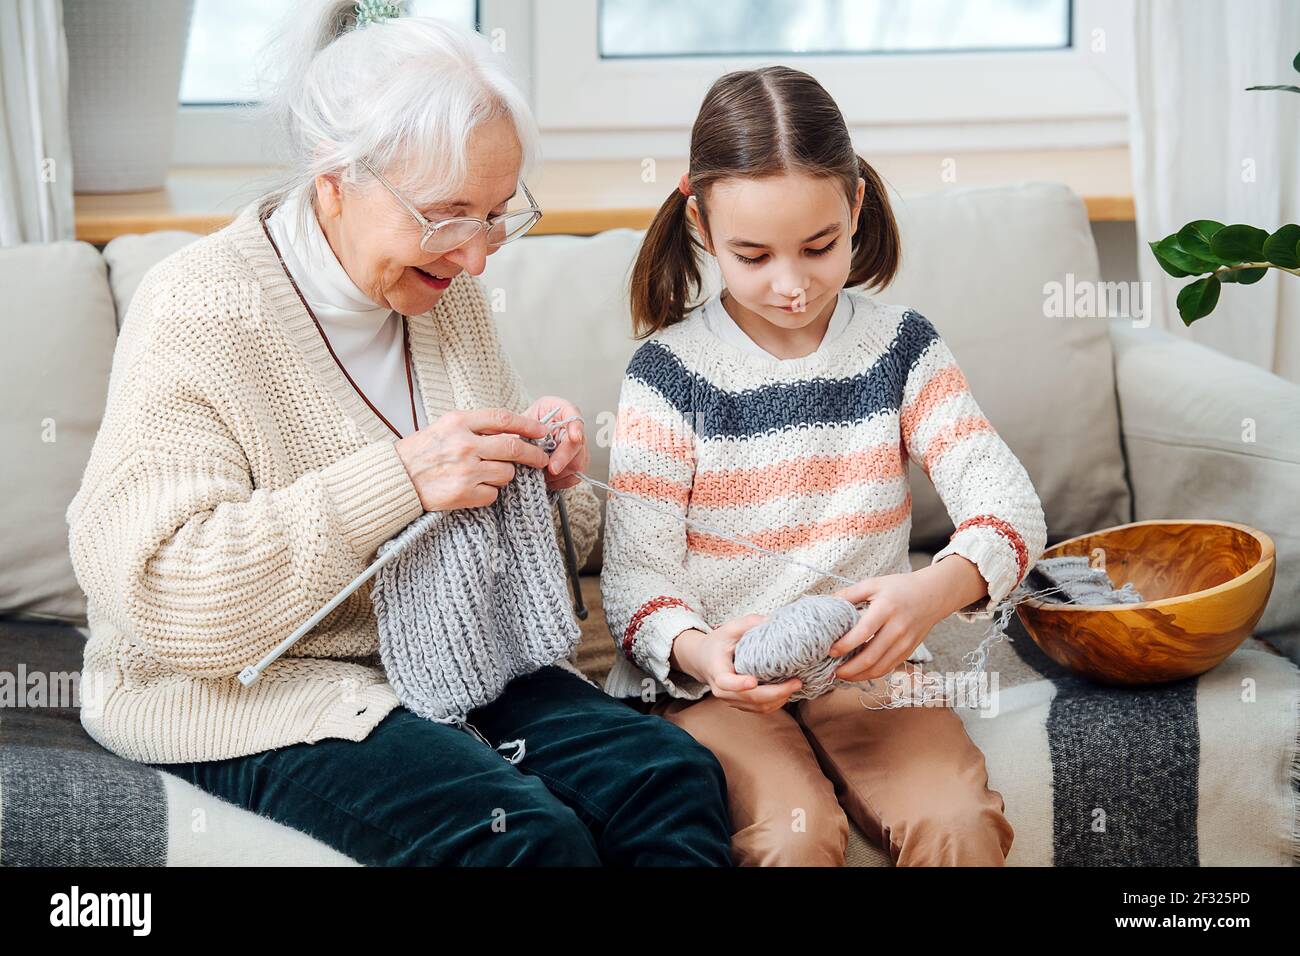 Cheerful granny knitting on a couch at home, her granddaughter helping her by unwinding ball of yarn. Stock Photo